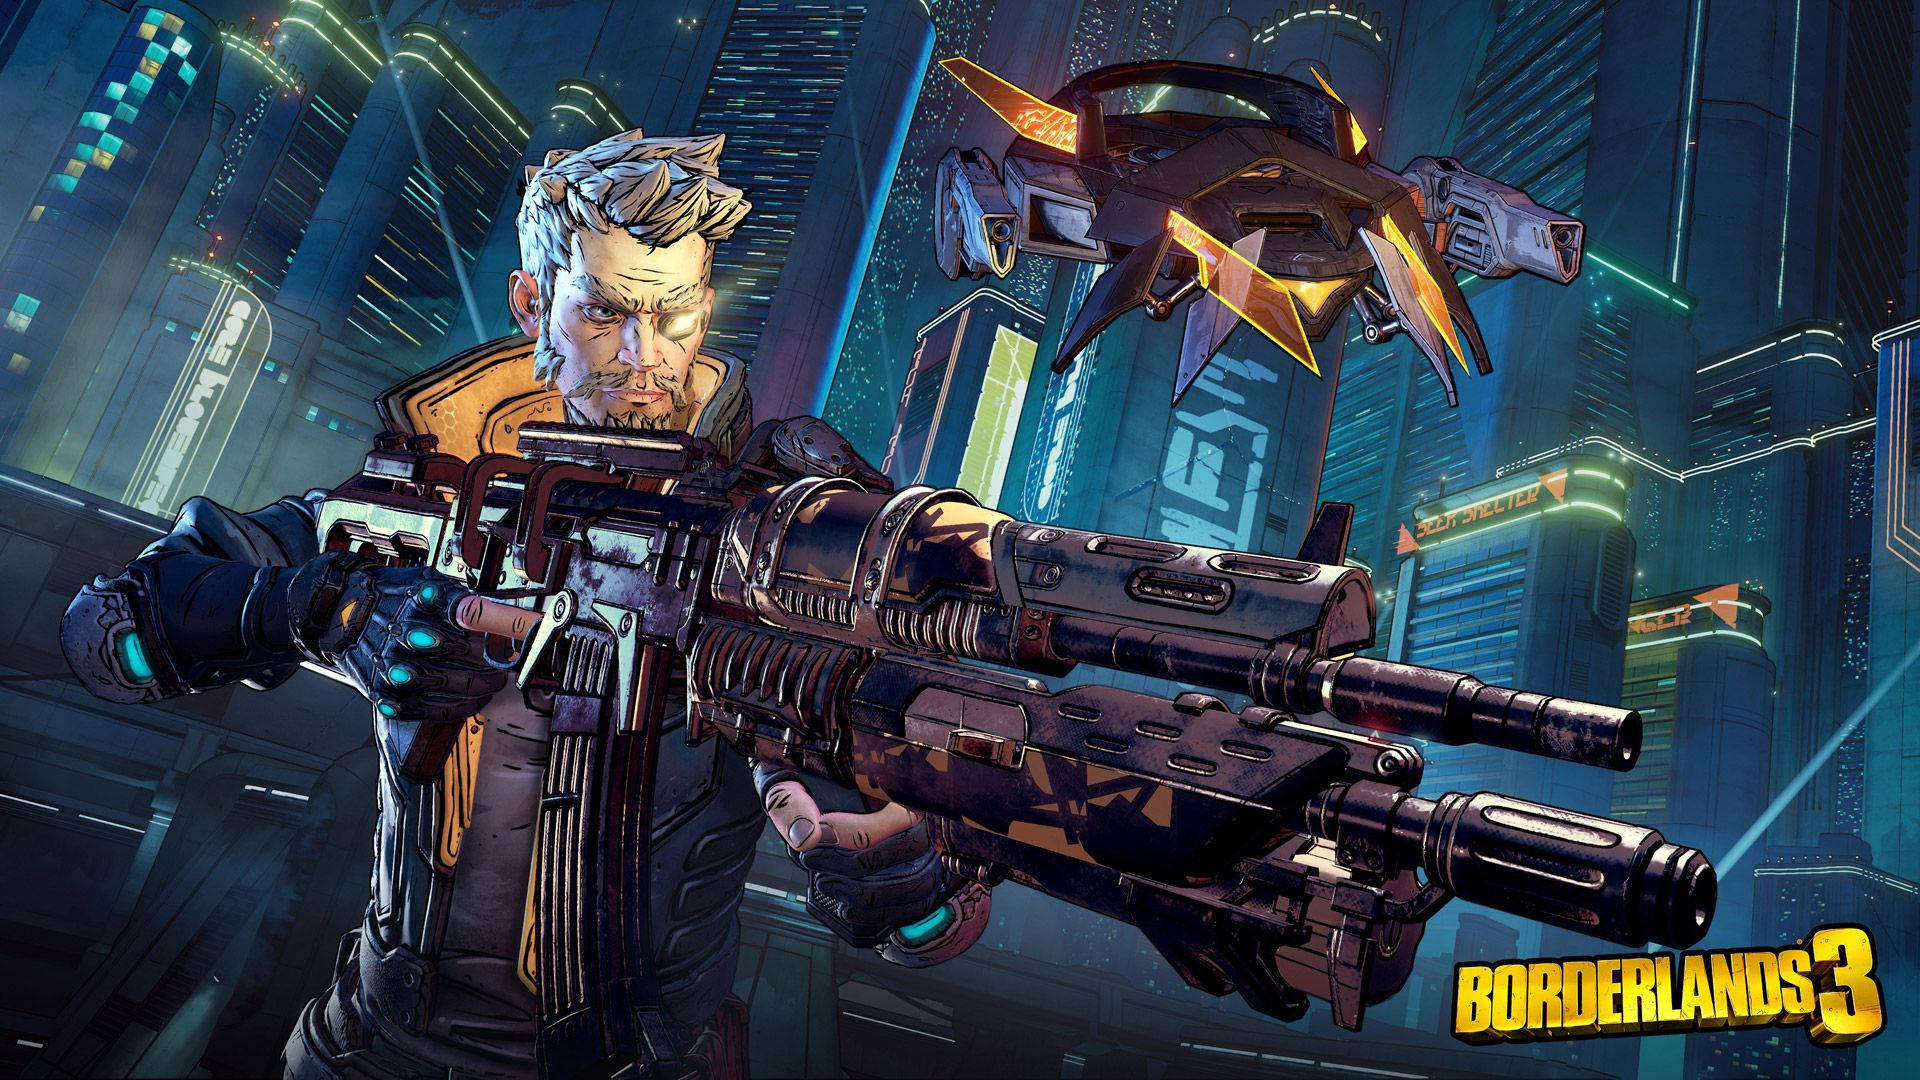 Take On the Challenges of Borderlands 3 With Zane Wallpaper